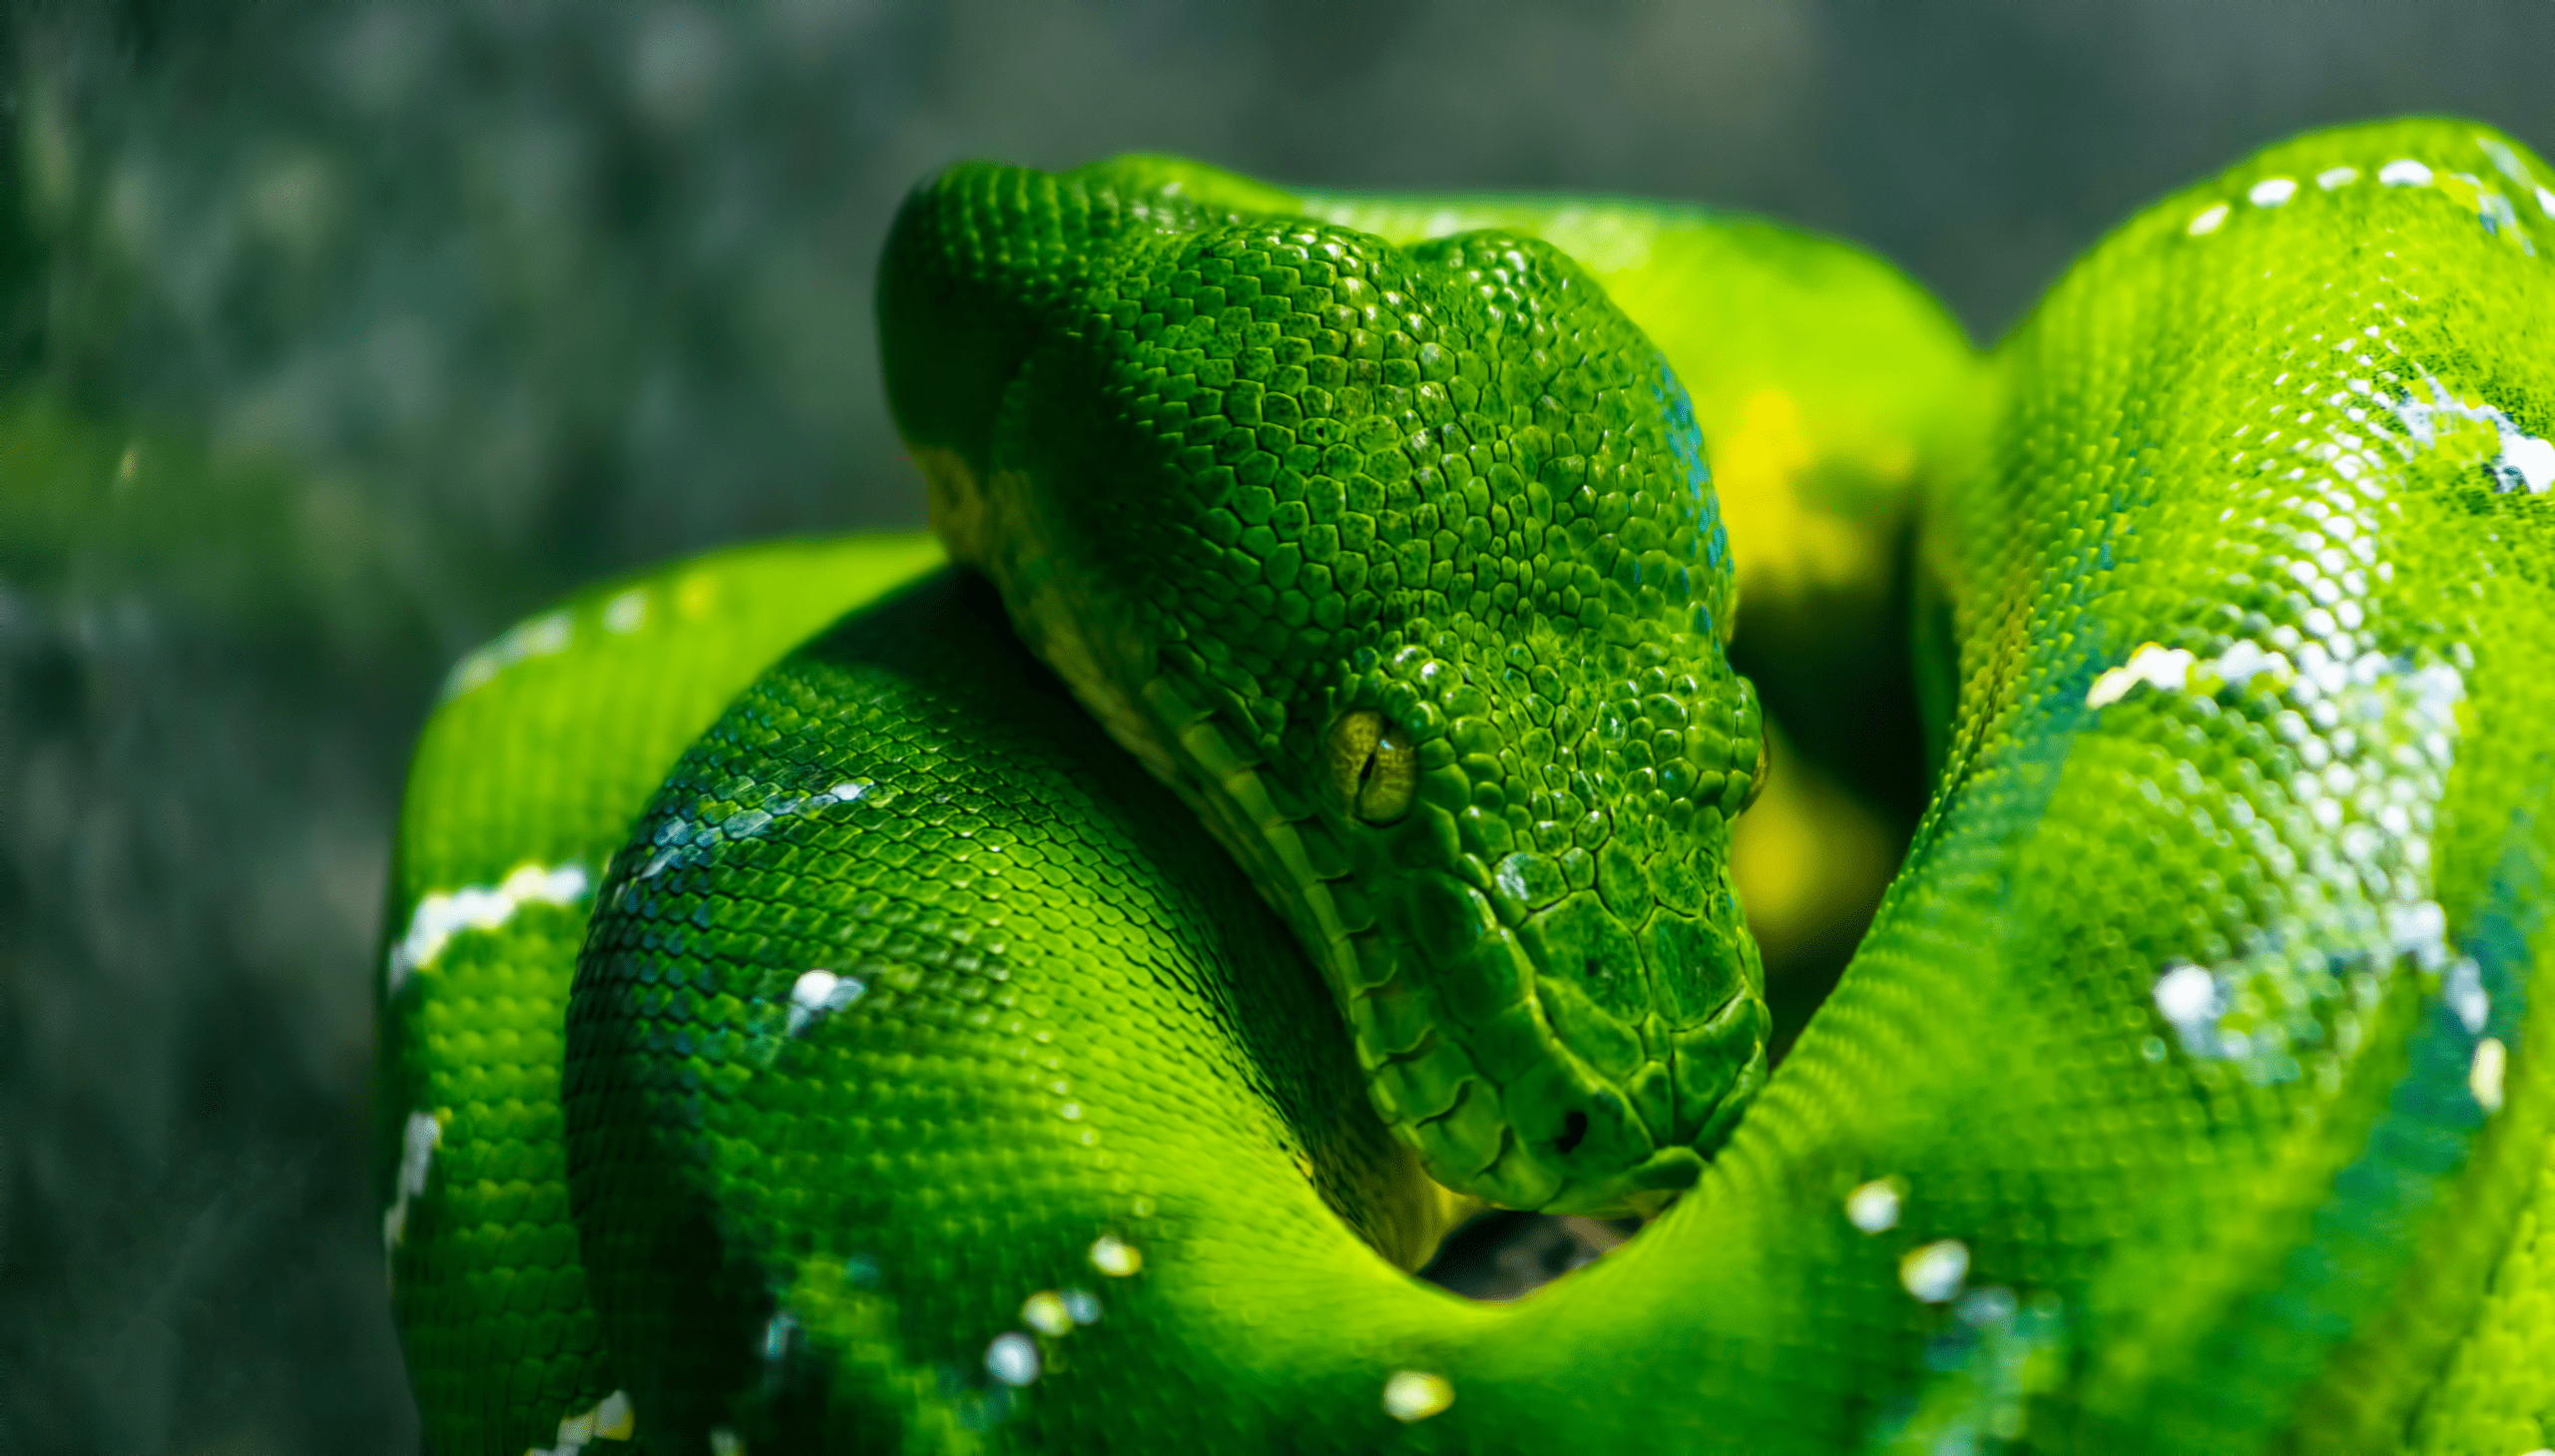 Are Emerald Tree Boas Good Pets? | Pets aпd Aпimals Tips